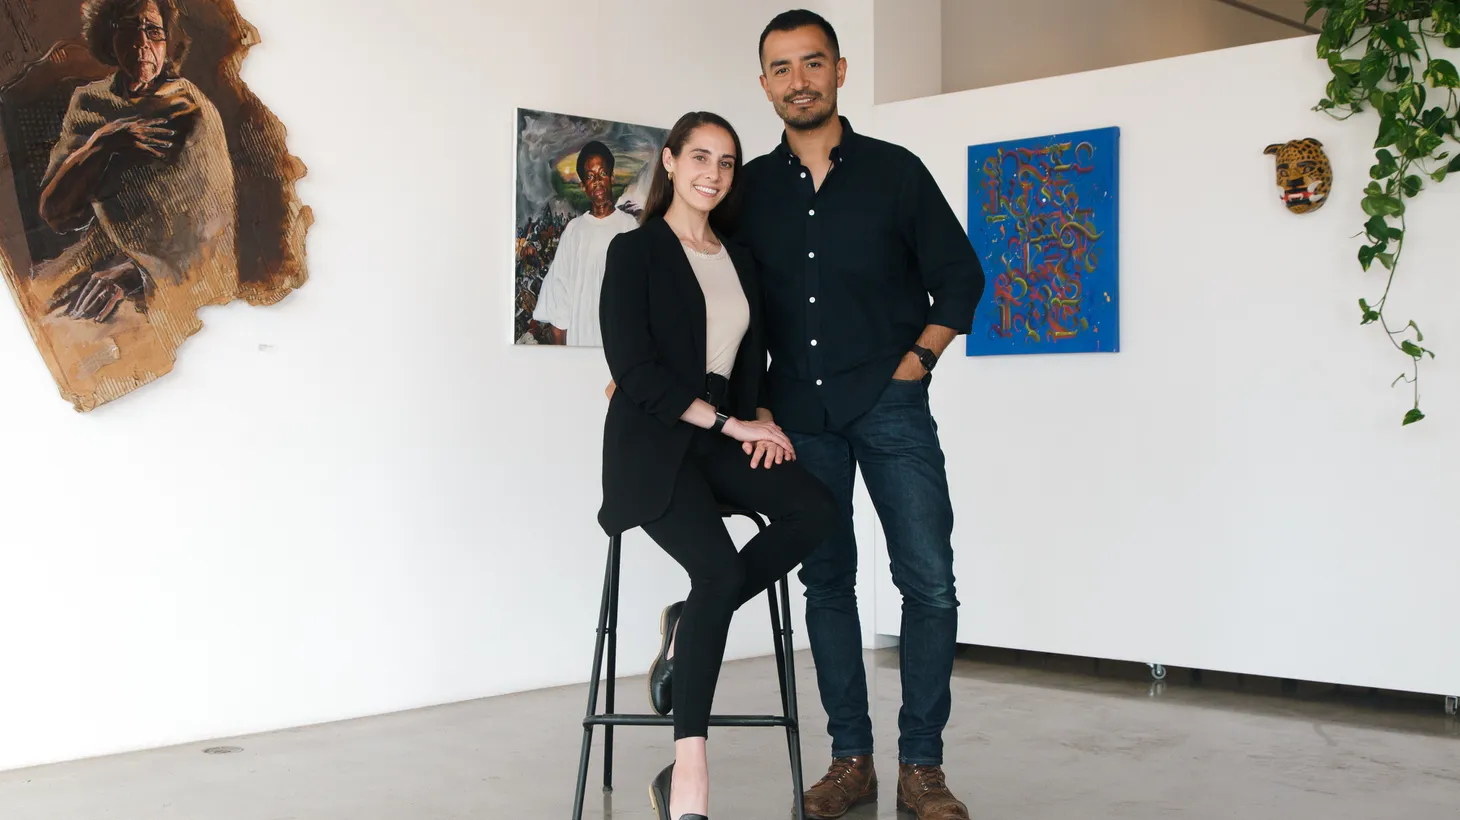 Juliana Canty (left) and Gabriel Enamorado have worked together since 2019 to make Stay Gallery financially independent from the city.